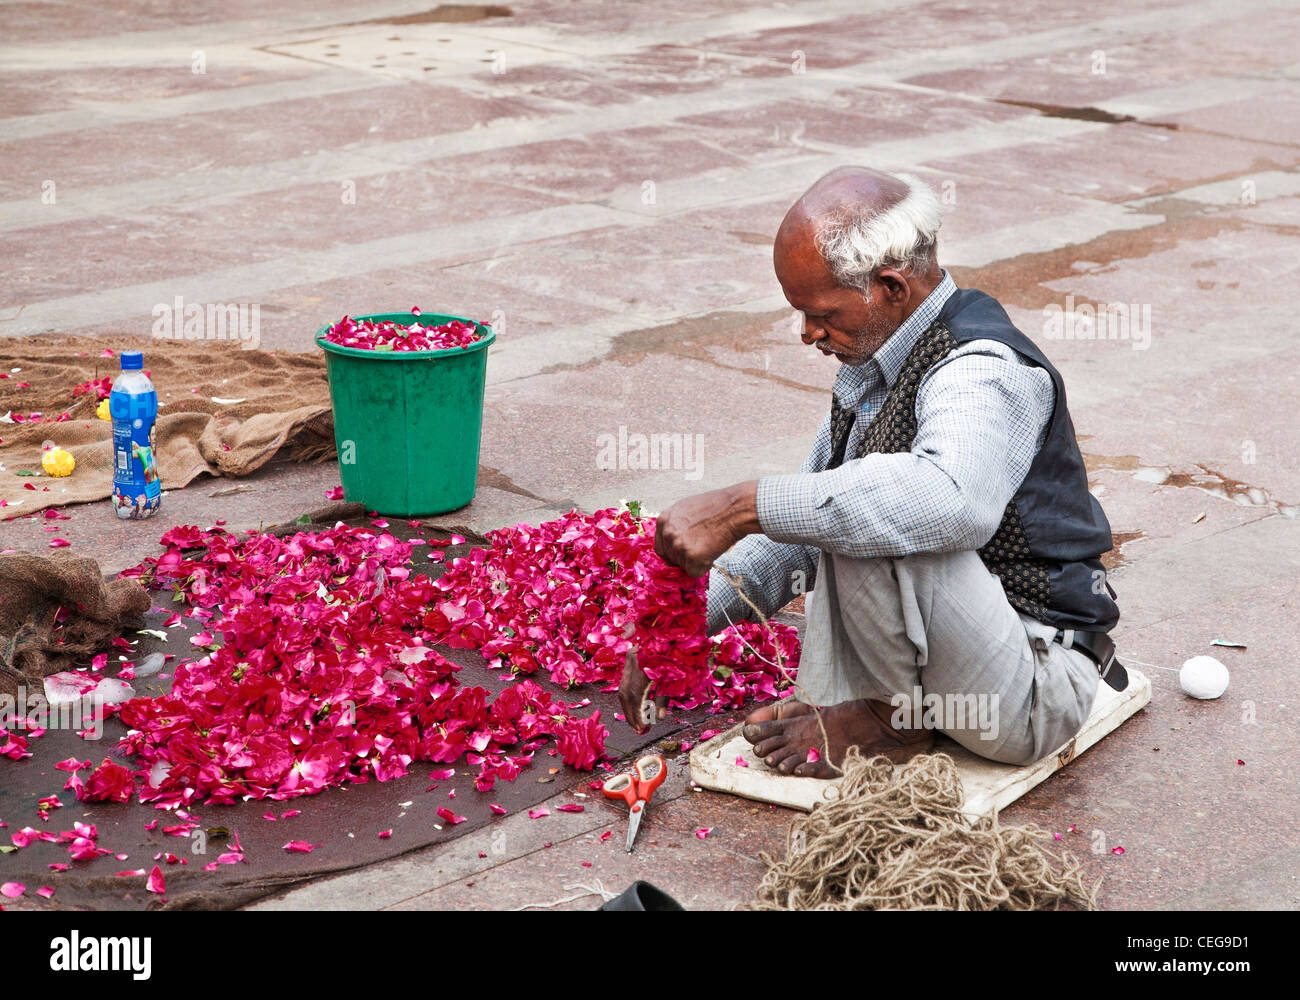 Street seller in New Delhi, India, preparing rose petals for garlands for Hindu worshipers at a nearly temple Stock Photo